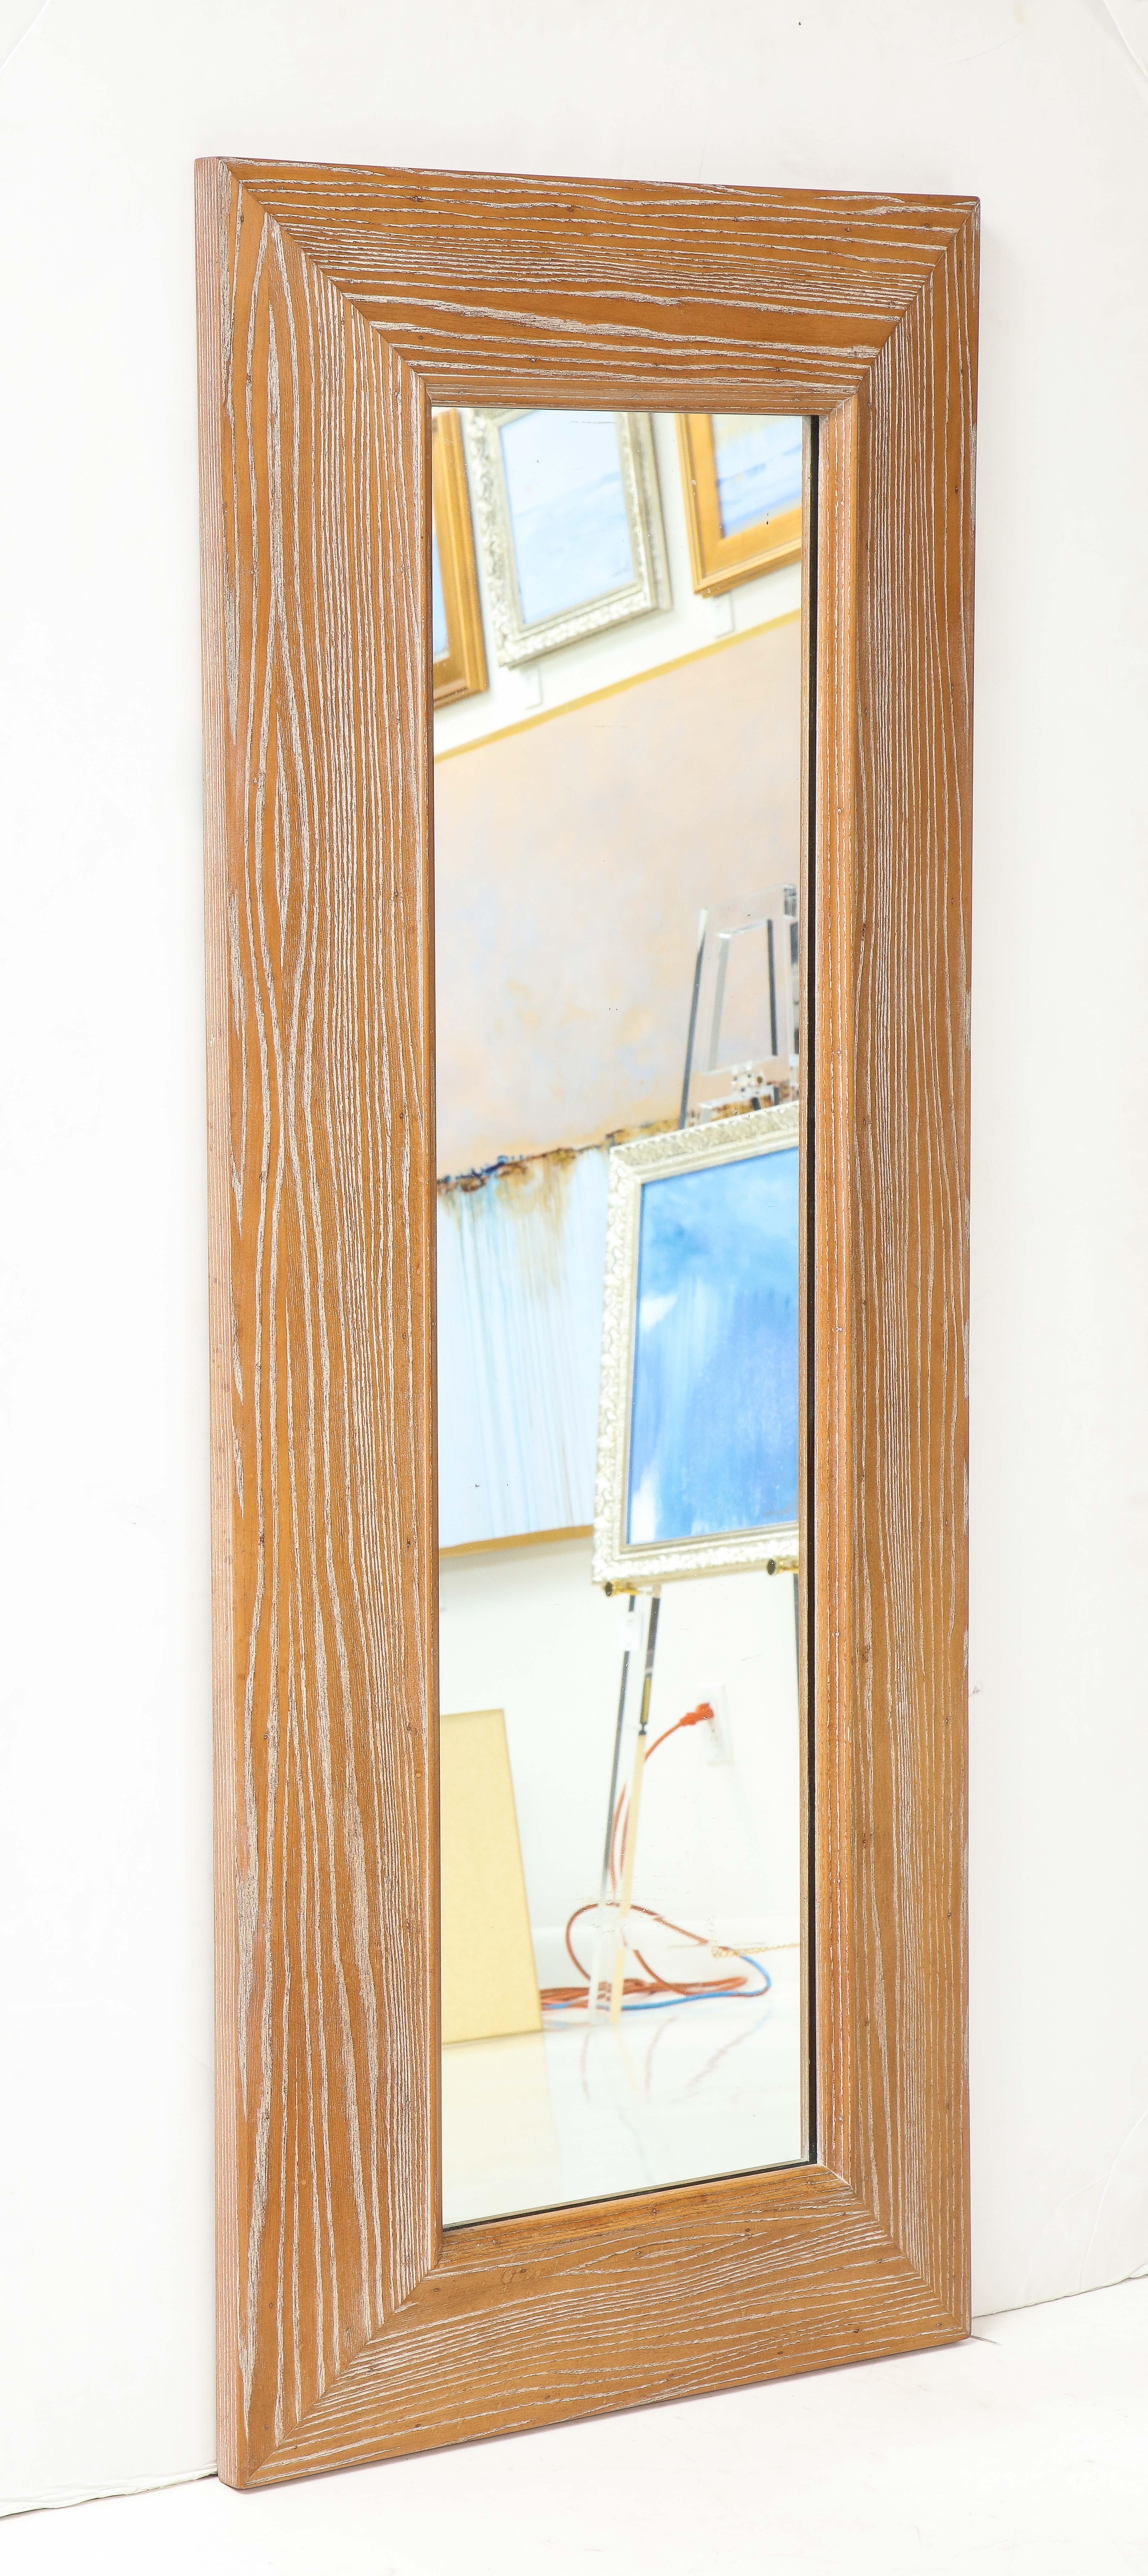 James Mont Cerused oak mirror.
The wood retains the original finish which is in excellent vintage condition.
The mirror can be hung horizontally or vertically.